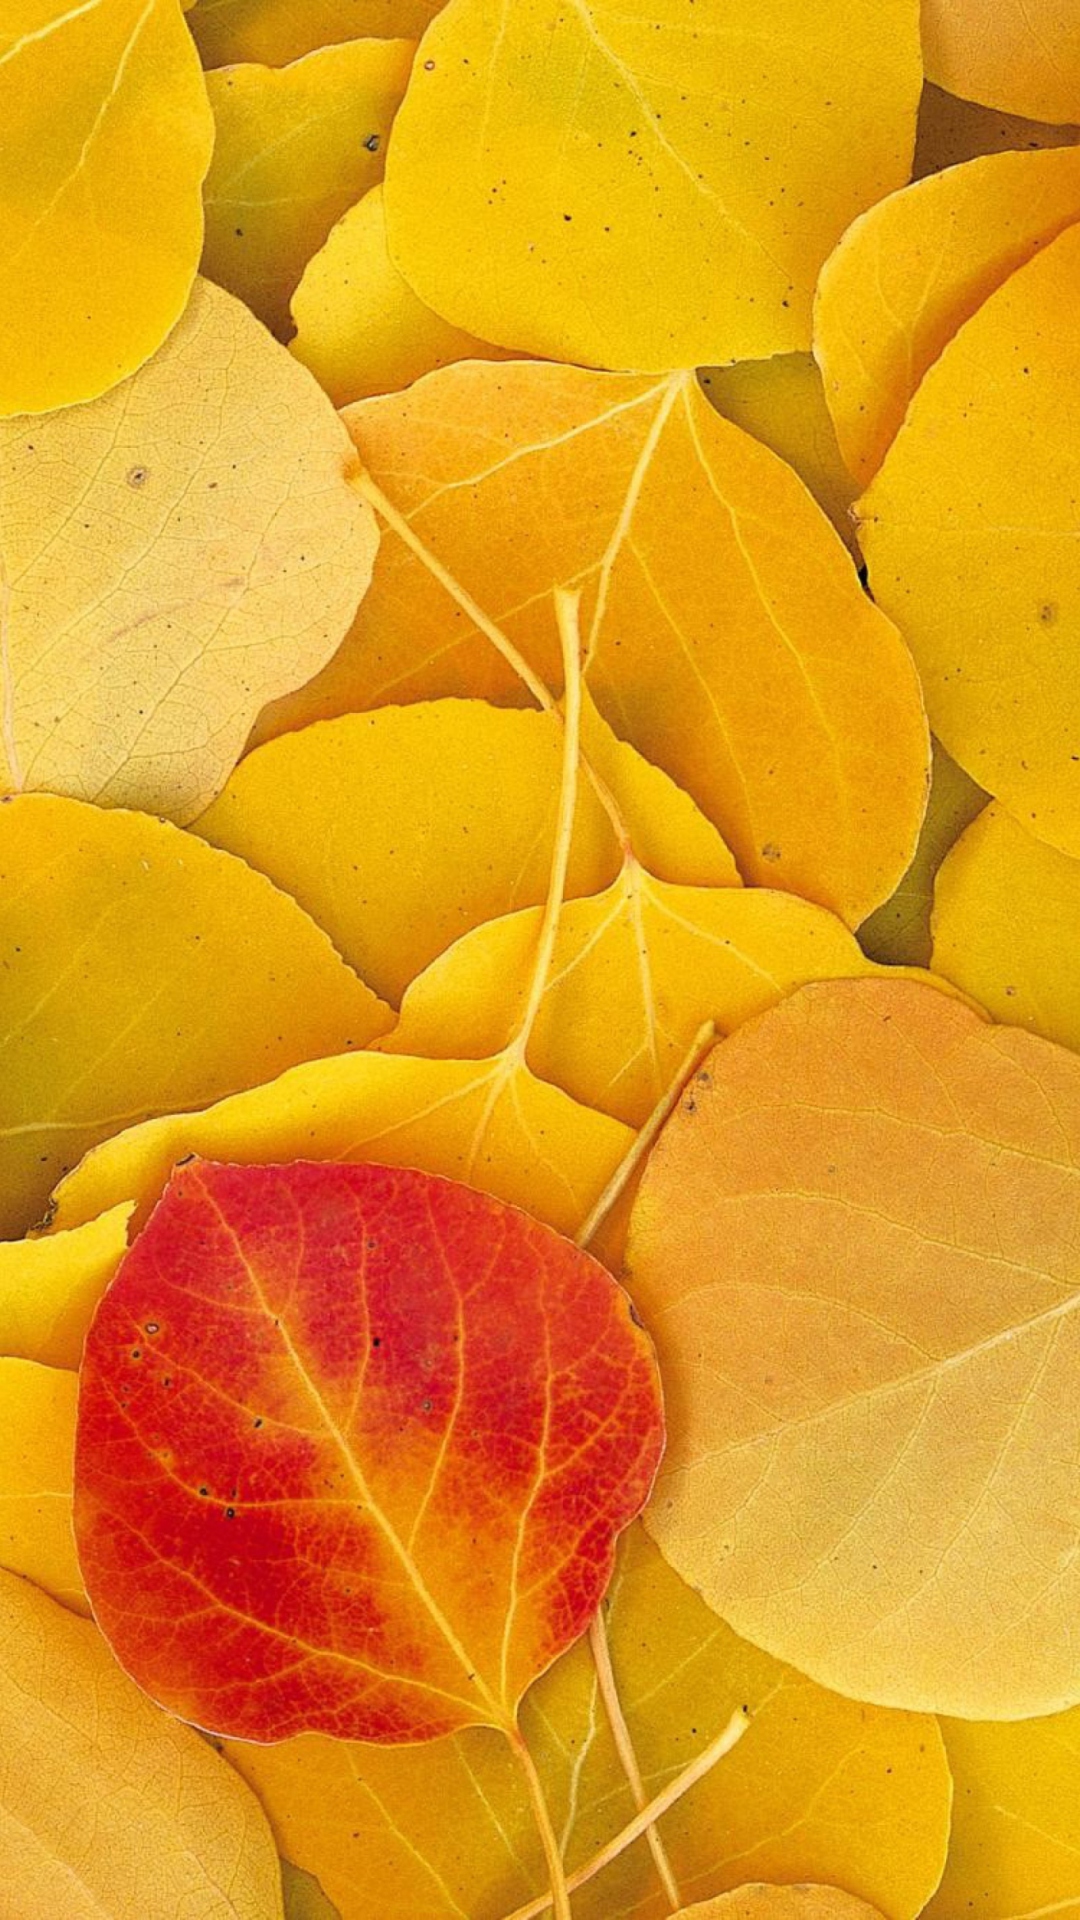 Red Leaf On Yellow Leaves wallpaper 1080x1920